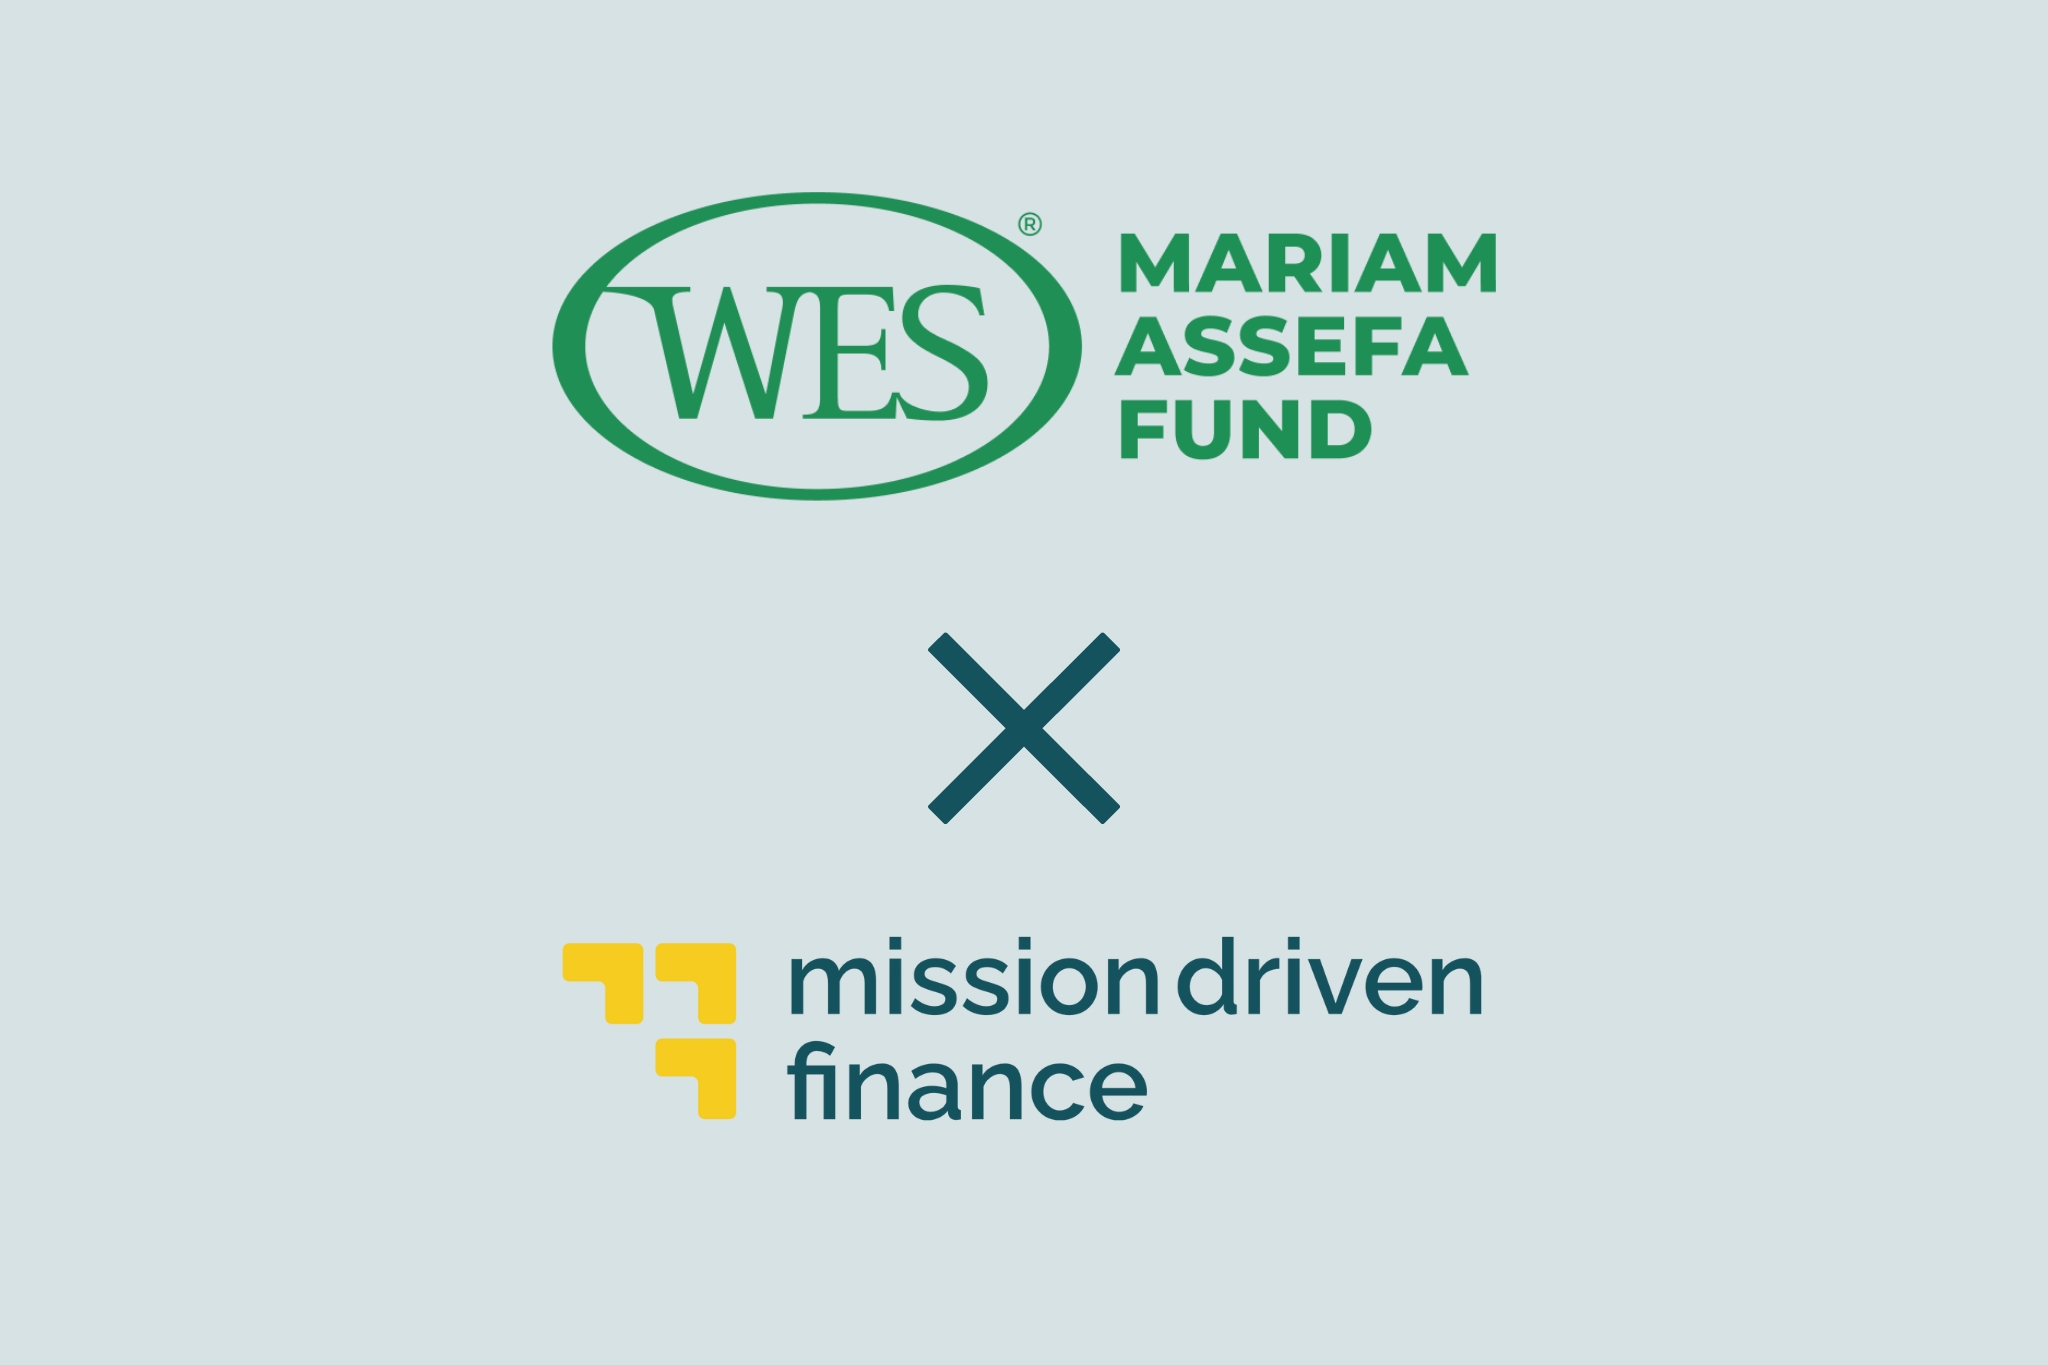 World Education Services Mariam Assefa Fund and Mission Driven Finance